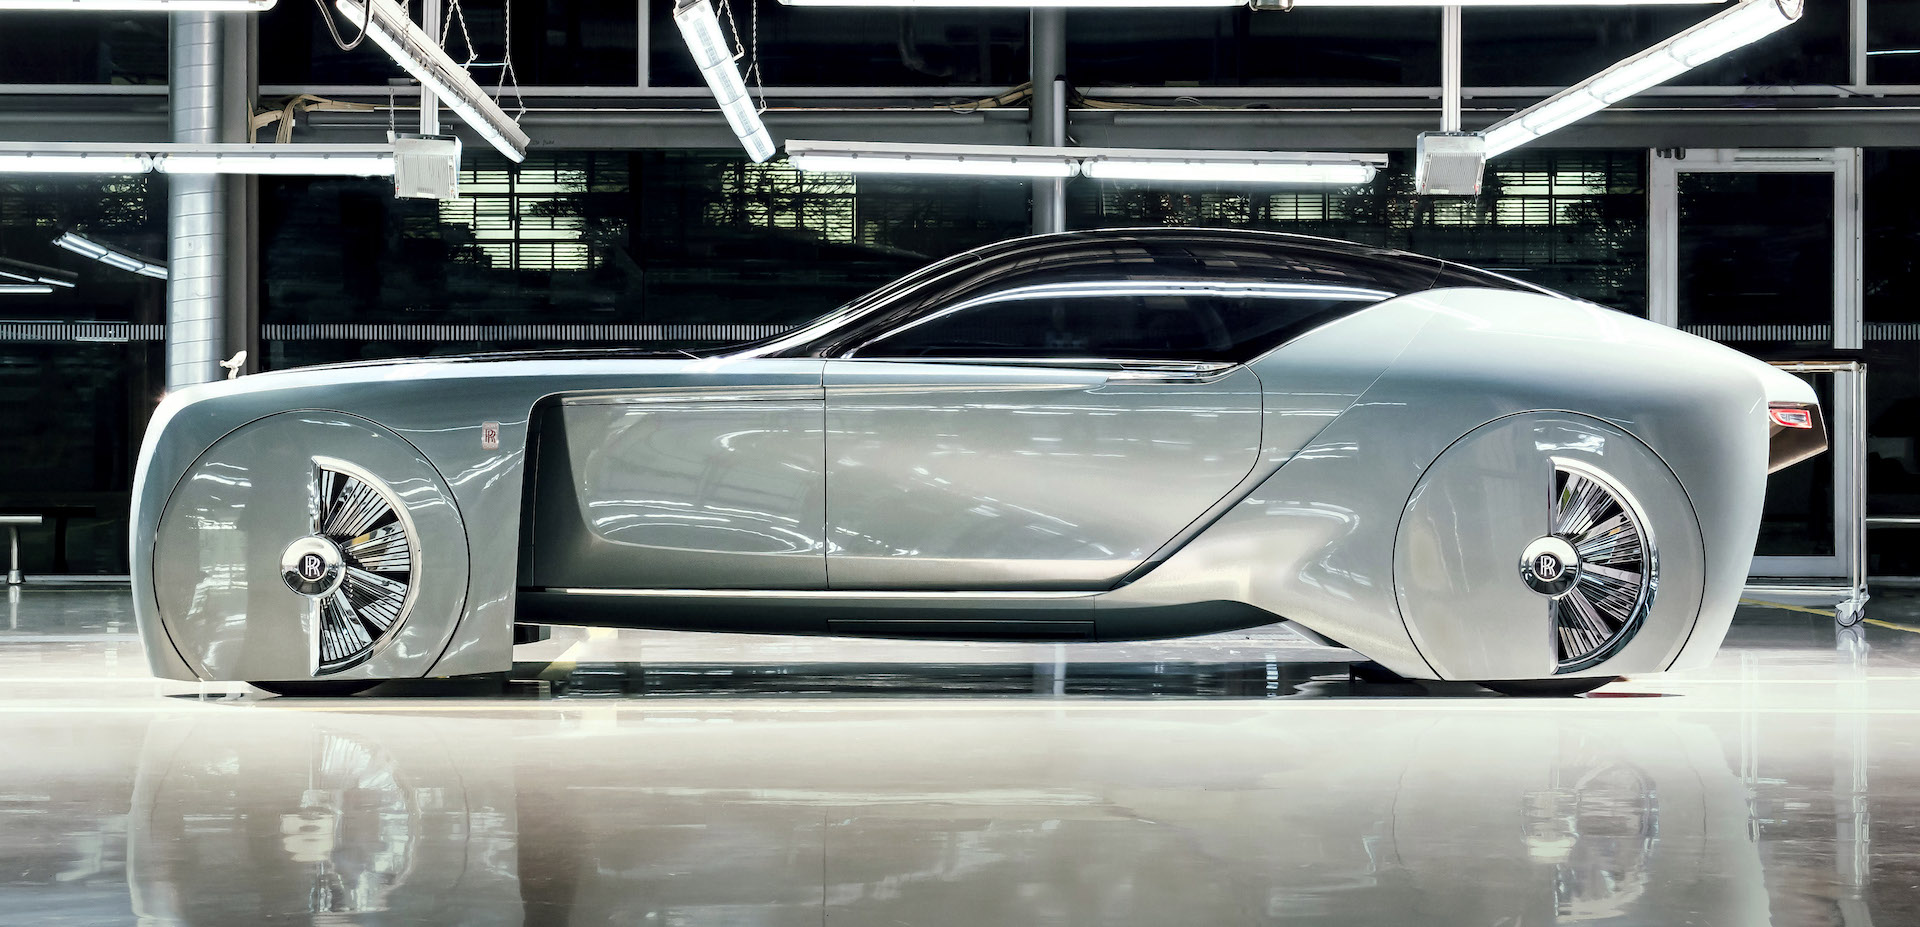 This is the Future of Rolls Royce in All-Electric Cars